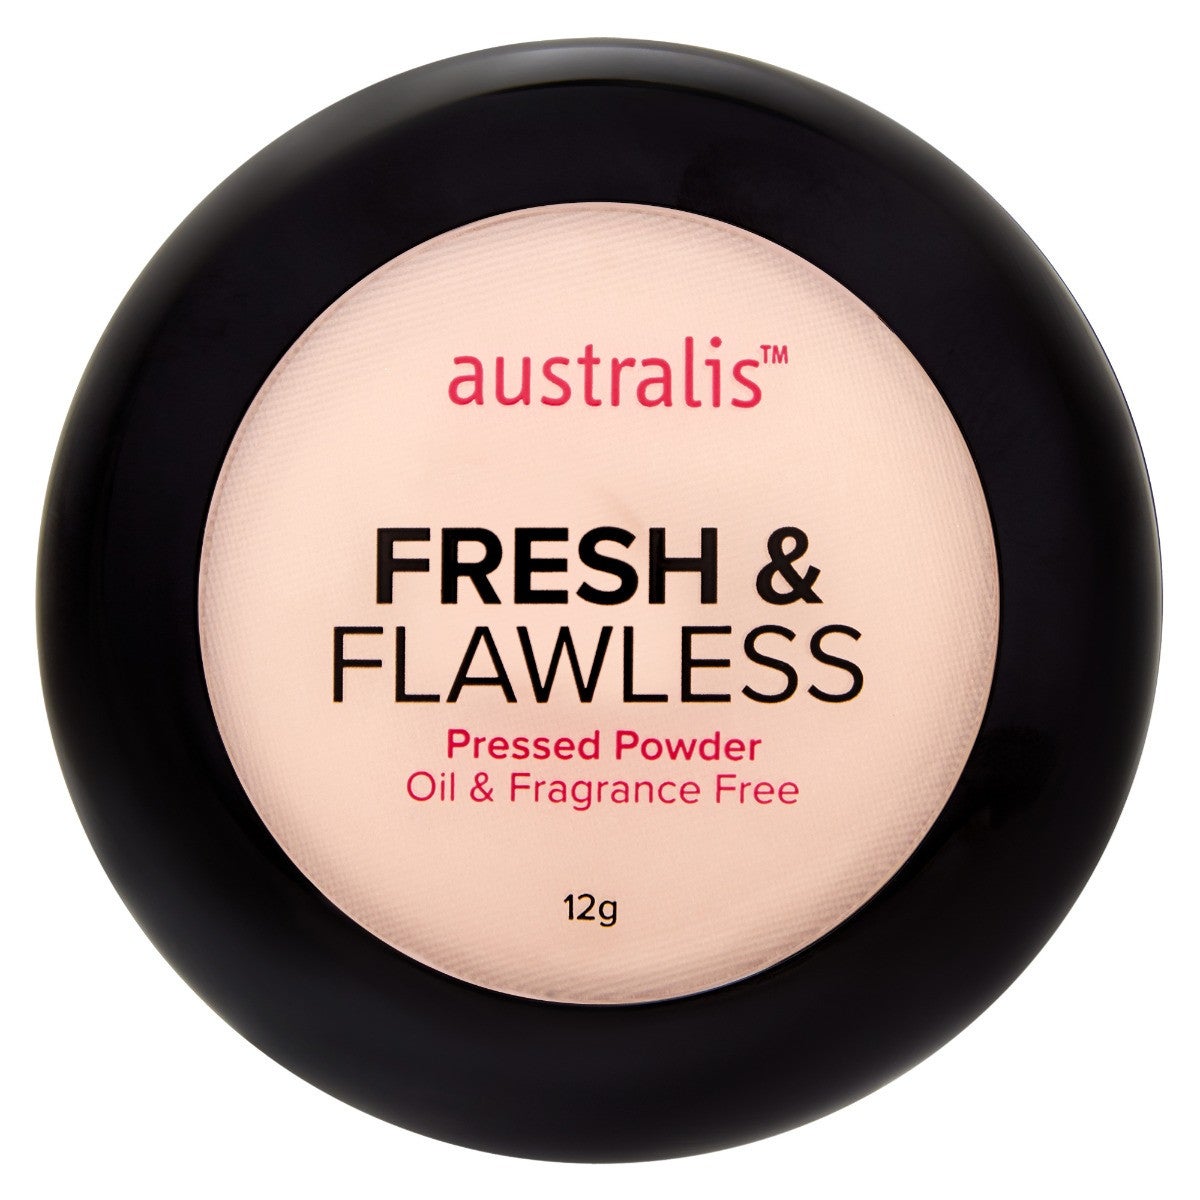 Australis Fresh and Flawless Matte Pressed Foundation Powder Face Skin Care Makeup - Natural